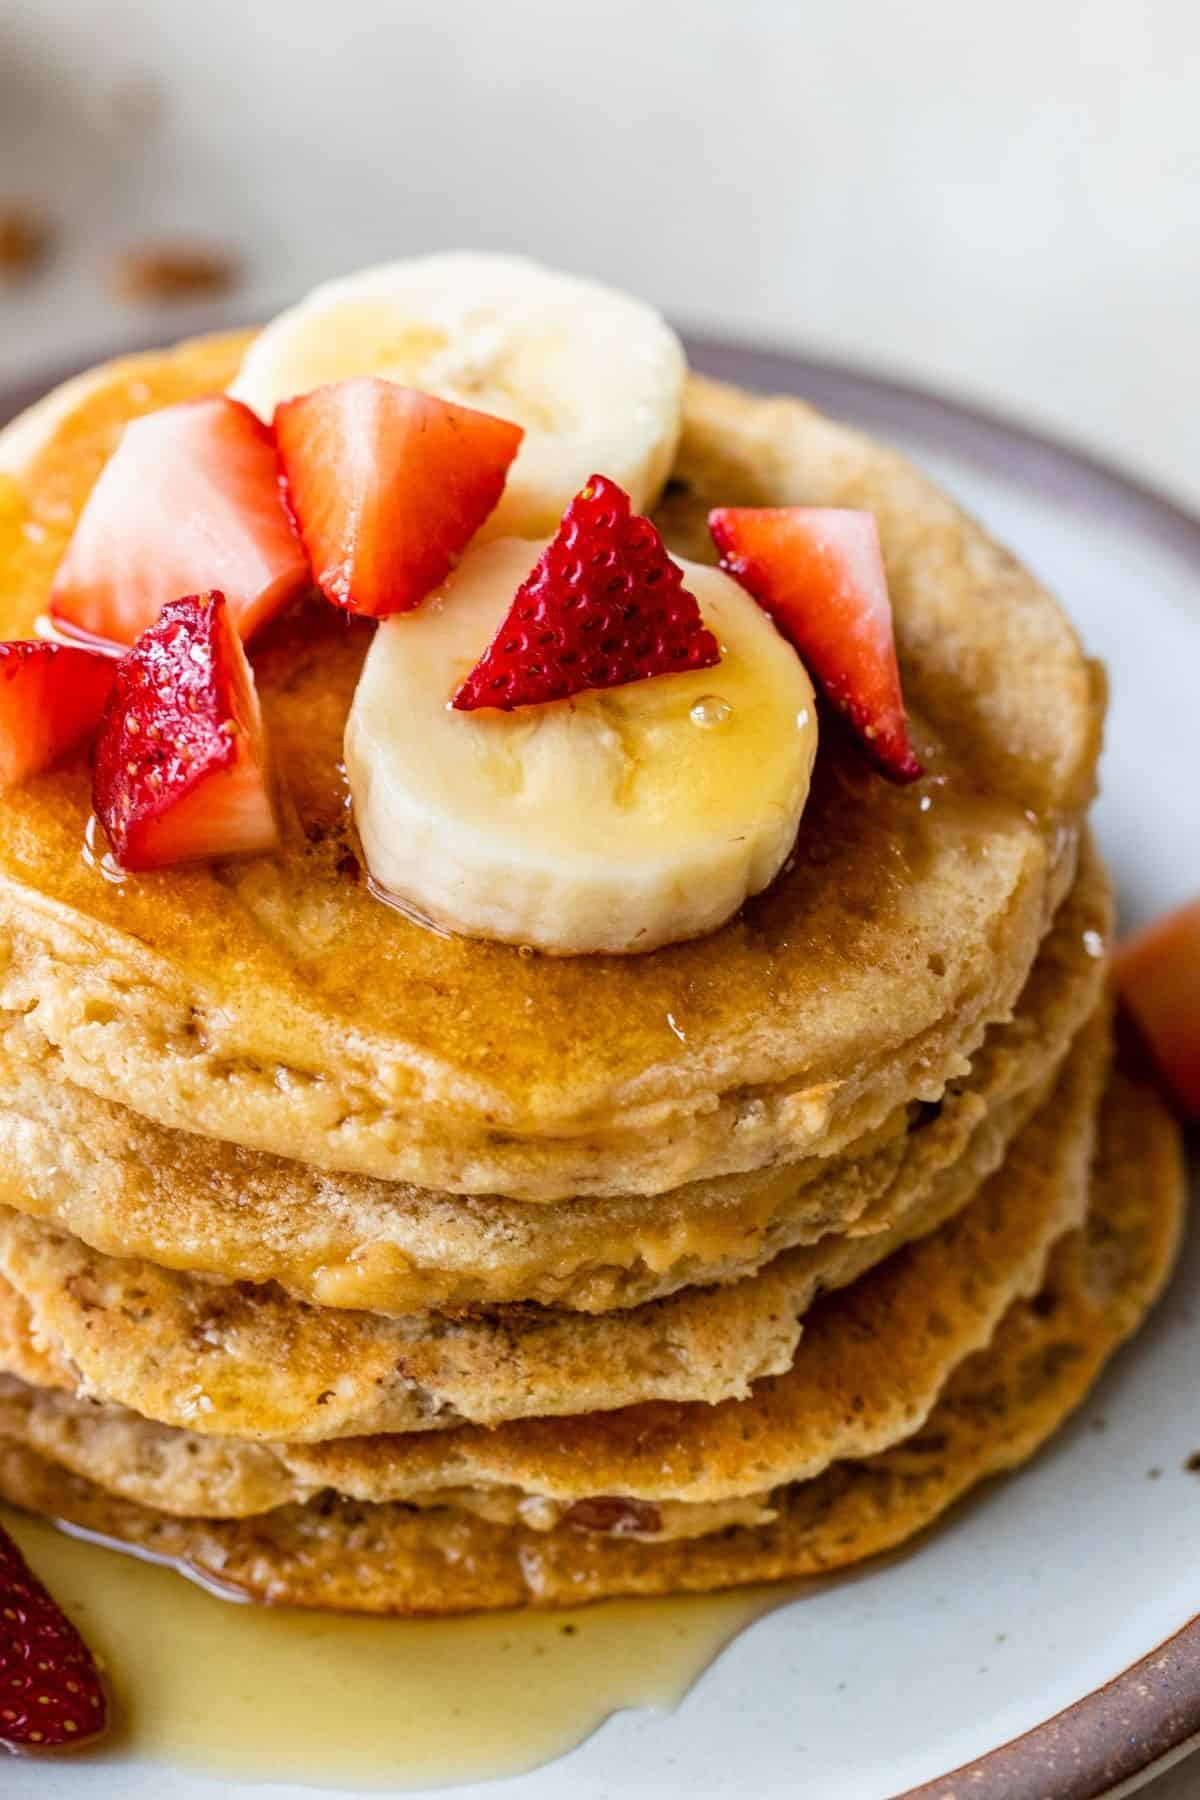 A stack of pancakes topped with syrup, berries and banana.